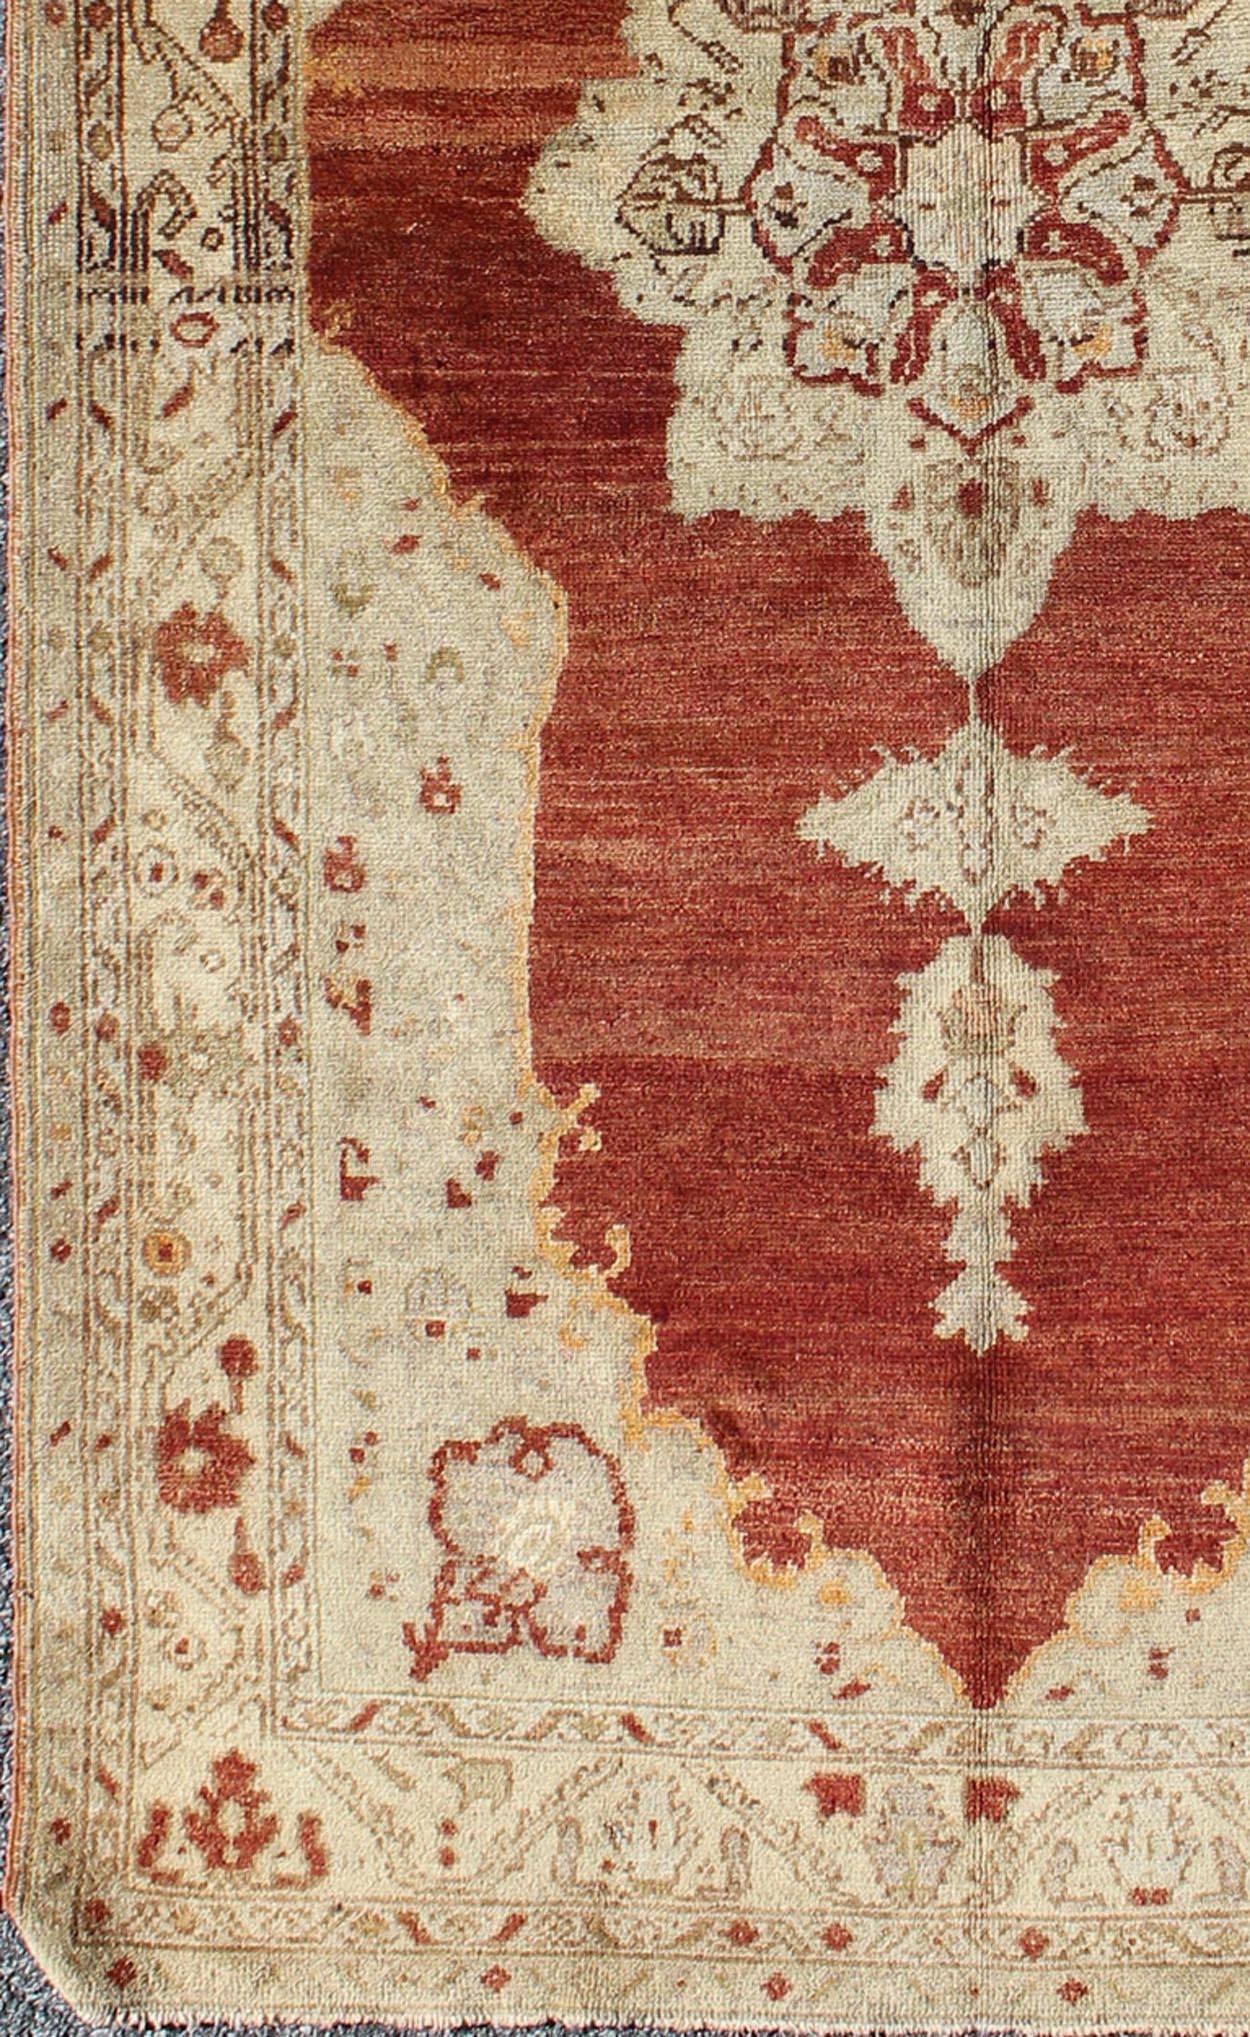 Antique Turkish Oushak rug with stretched medallion in red, ivory, cream, gray, rug na-41519, country of origin / type: Turkey / Oushak, circa 1920

This vintage Turkish Oushak rug features an intricately beautiful design with a traditional